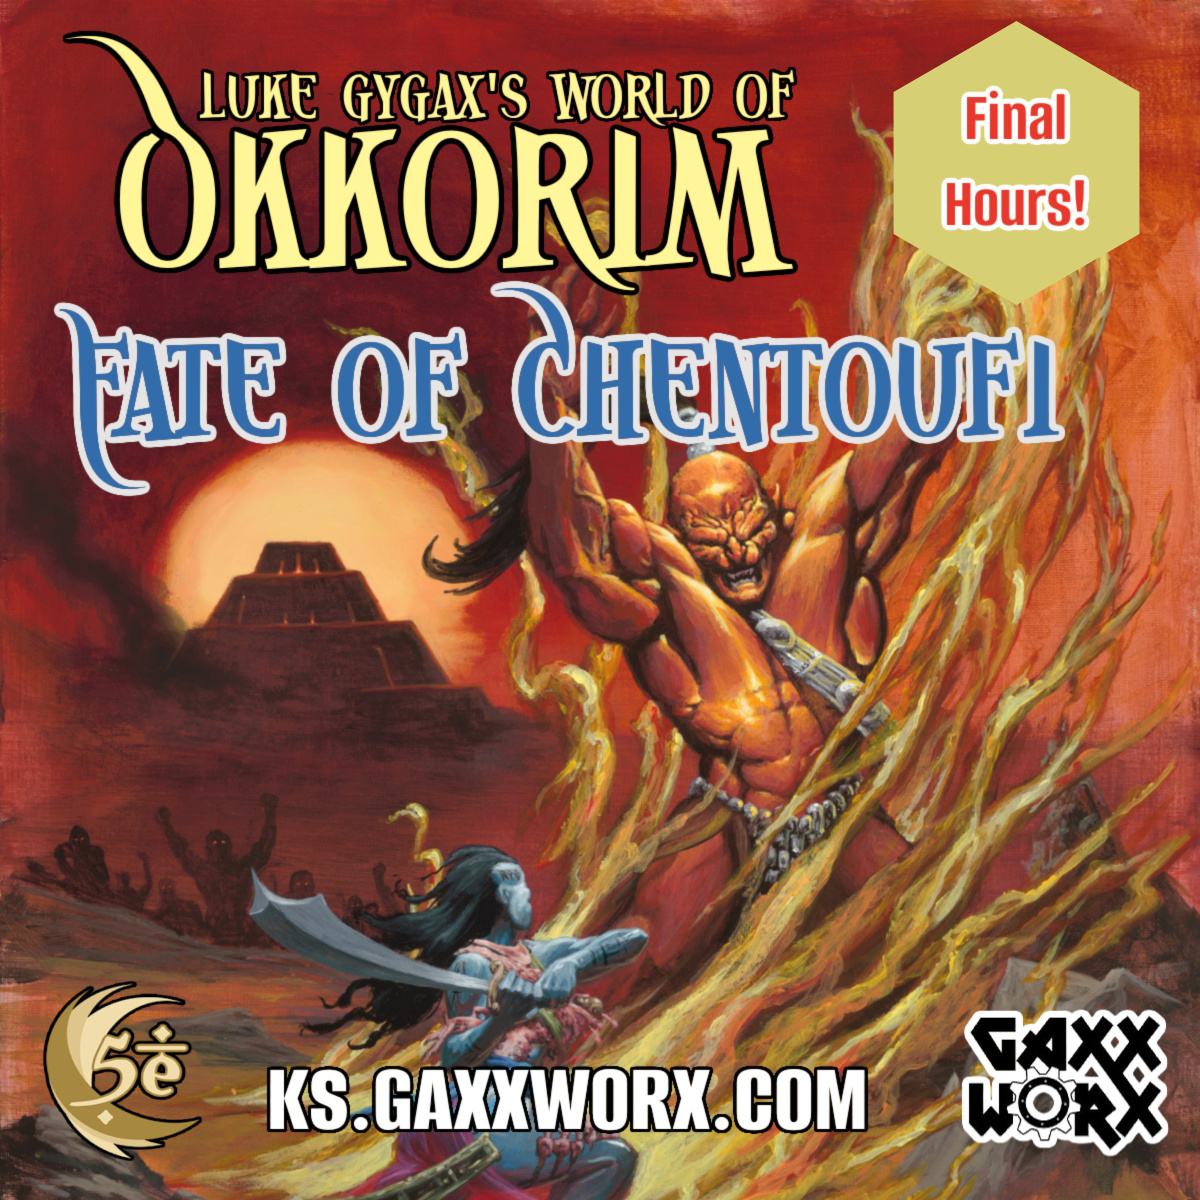 Only hours left! The Fate of Chentoufi rests in your hands as a malevolent force from the long-dead Ydrissid Empire seeks to subjugate the city! Back action packed scenario fron Luke Gygax and Matt Everhart here ks.gaxxworx.com #dnd #ttrpg #gygax #okkorim #chentoufi